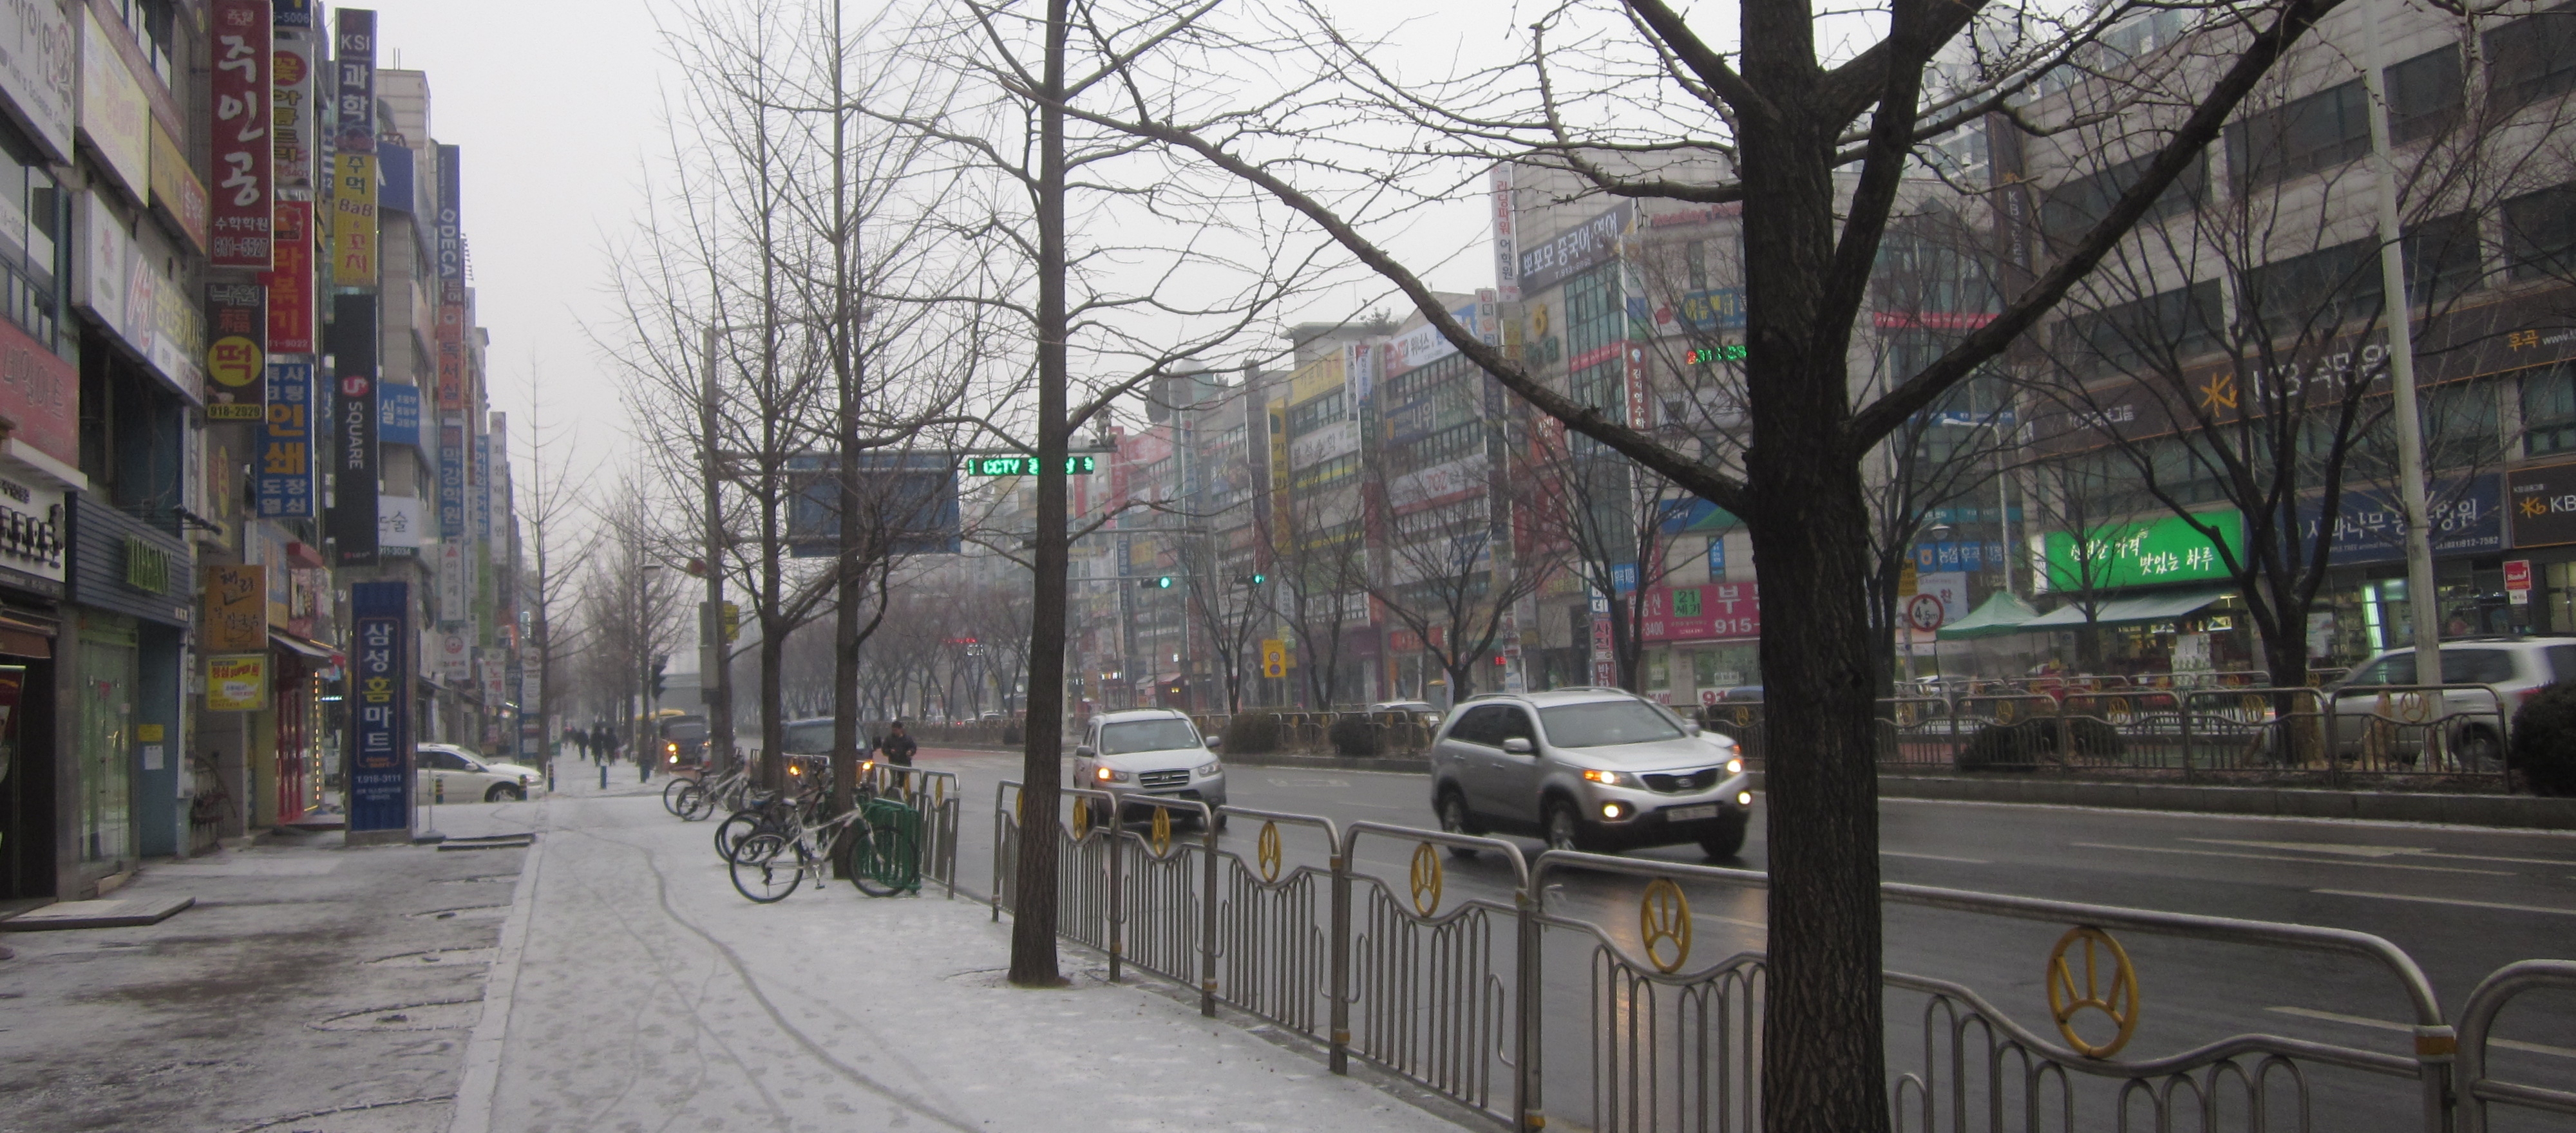 A picture taken in 2012 along a city street called Ilsan-ro in Goyang City, South Korea. Snow, some urban trees without leaves, lots of buildings along each side.